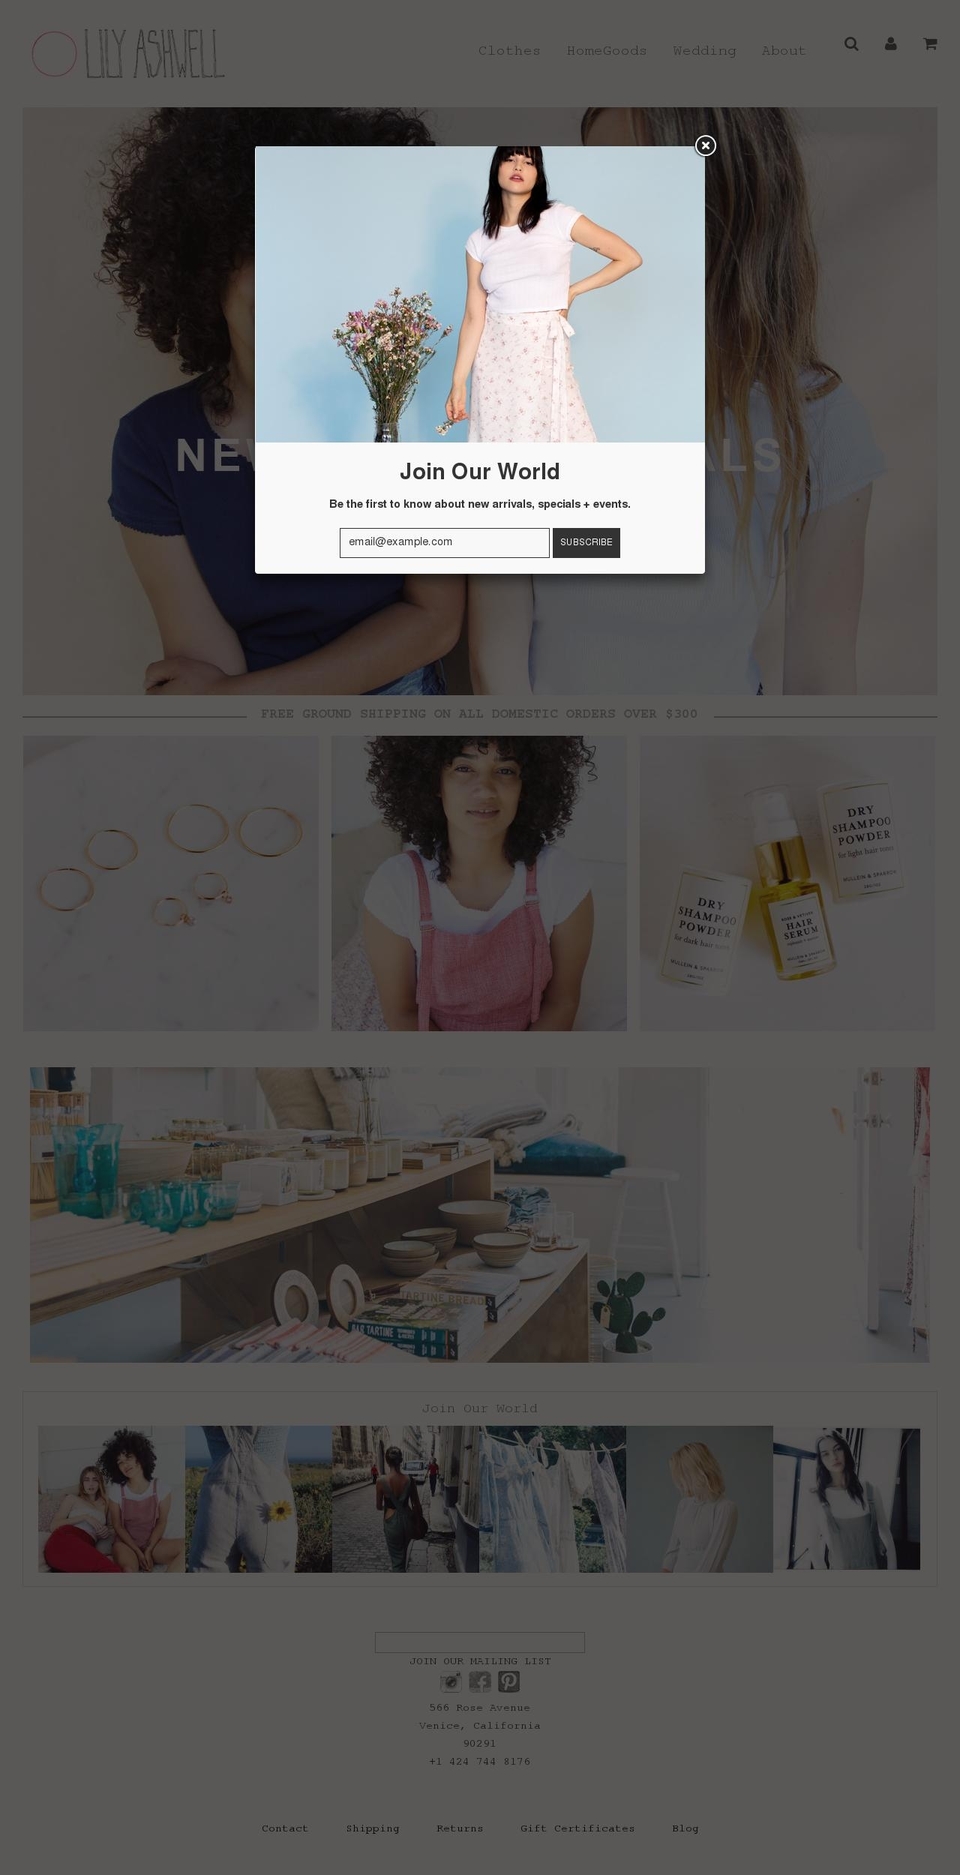 Broadcast Shopify theme site example lilyashwell.com